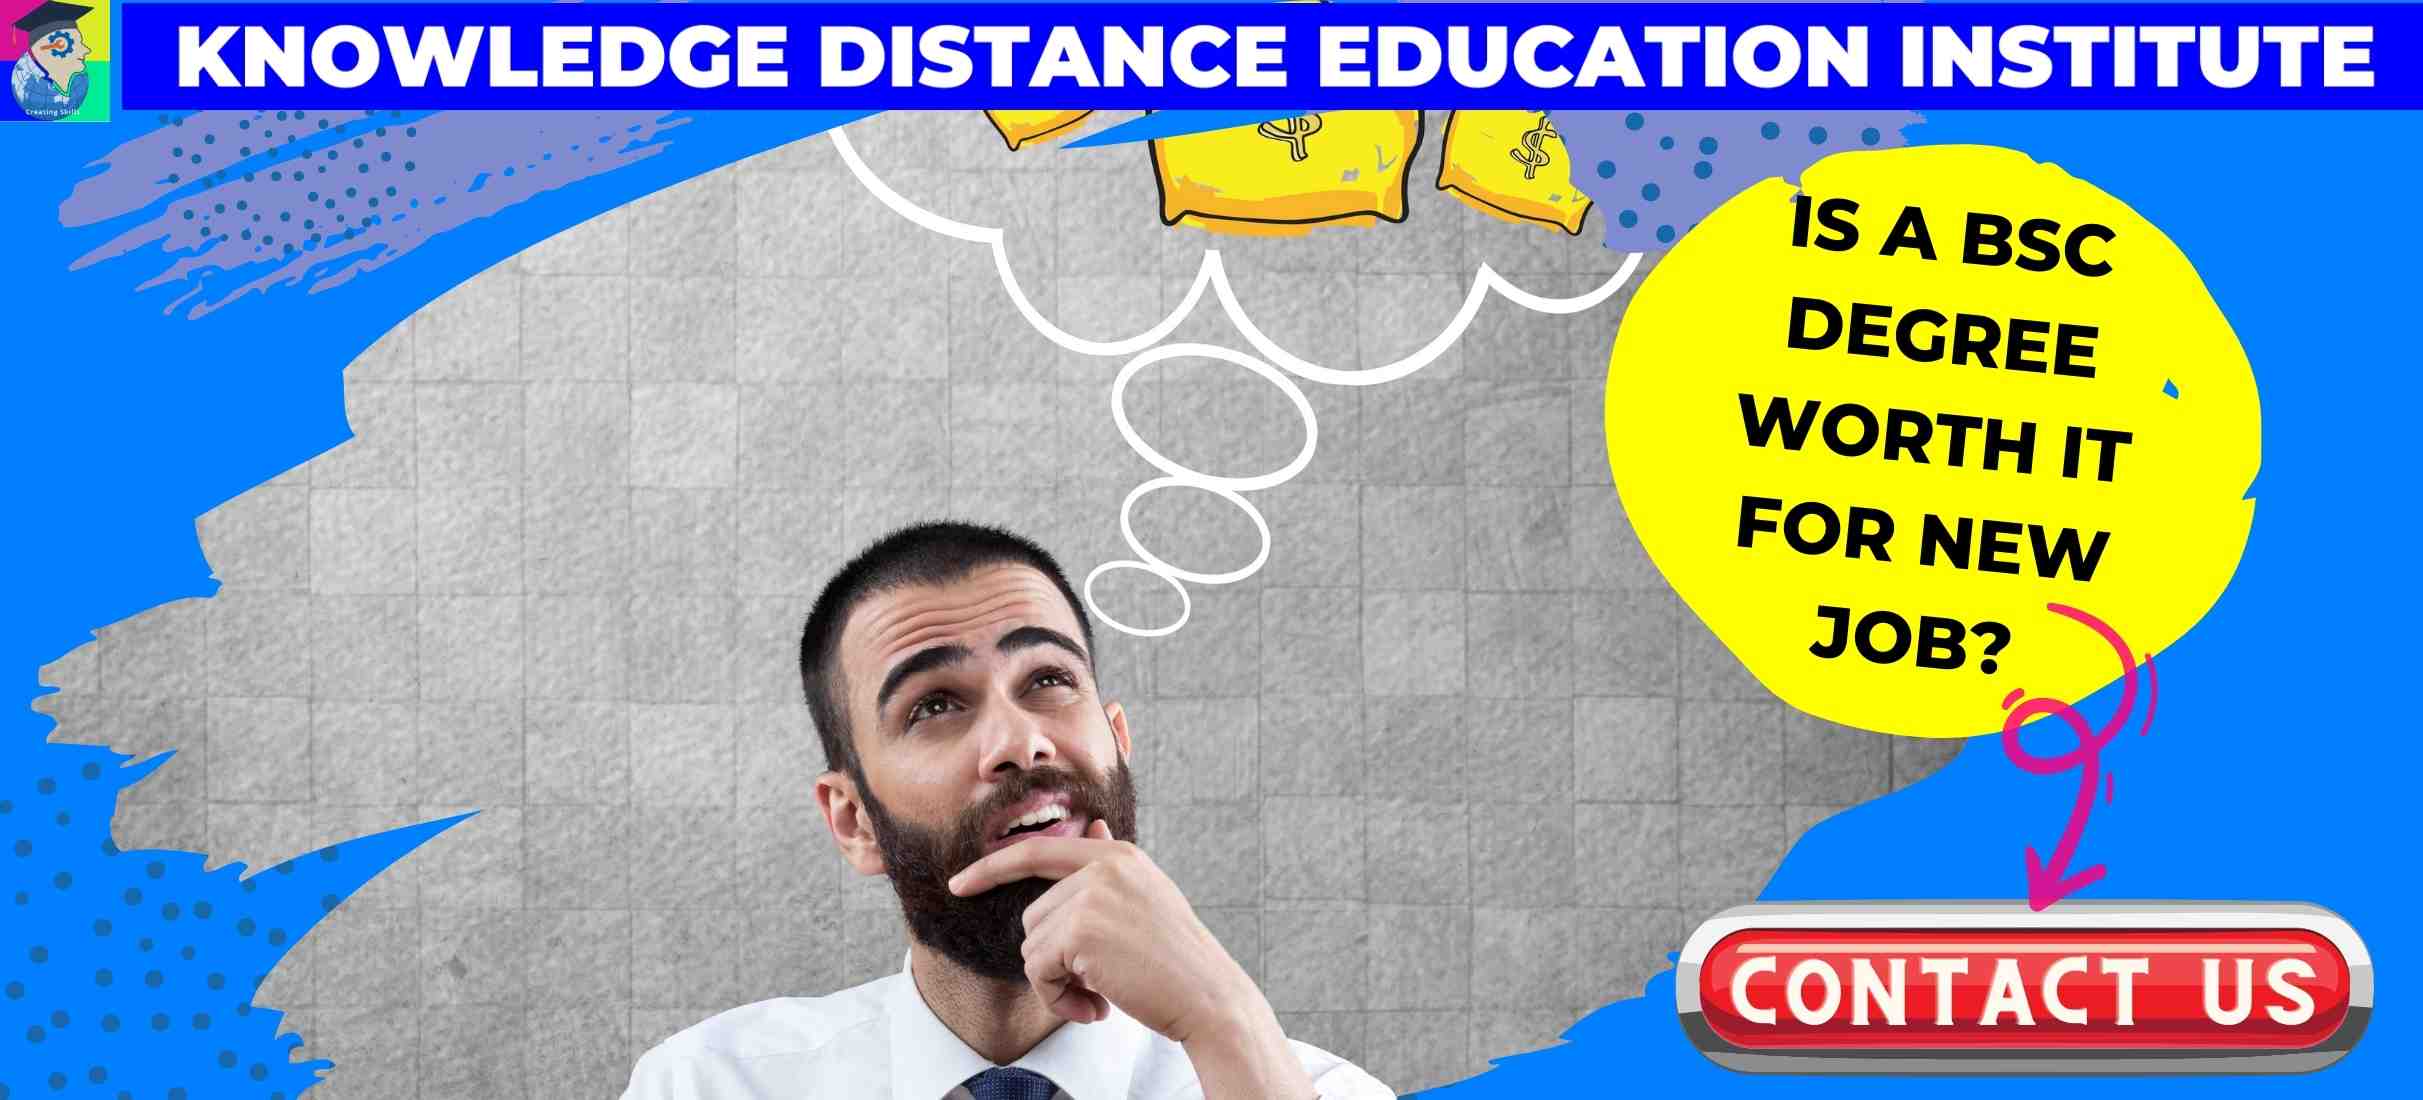 Bachelor Of Science - B.Sc is 3 years degree course, offered in Part-time or Regular Learning modes by UGC recognized Universities in India. For career guidance you may contact Knowedge Distance Education Institute on +91 9029020524